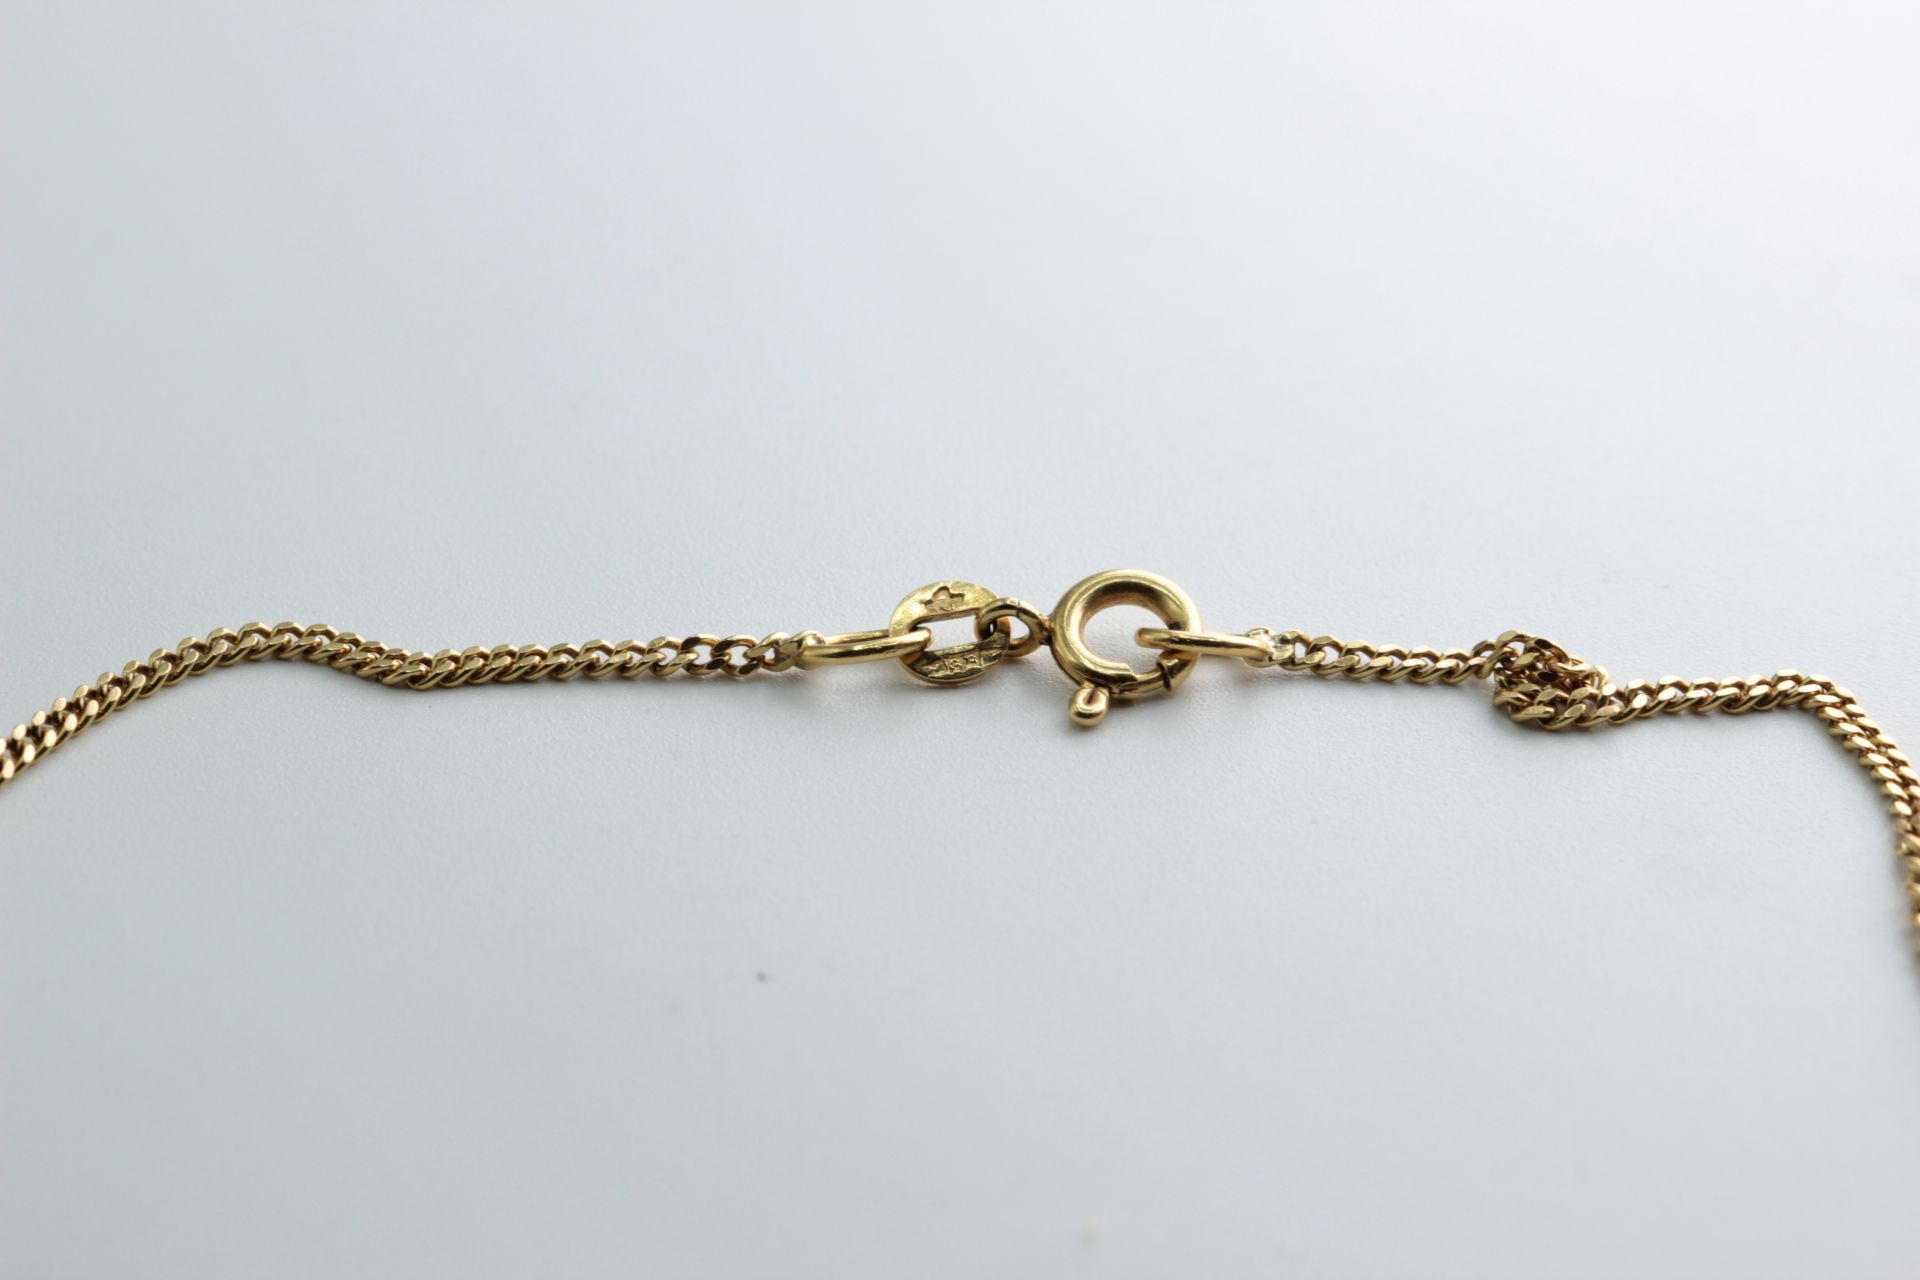 Necklace / Chain / Flat Curb Chain 62cm 24.4 inches - Image 5 of 5